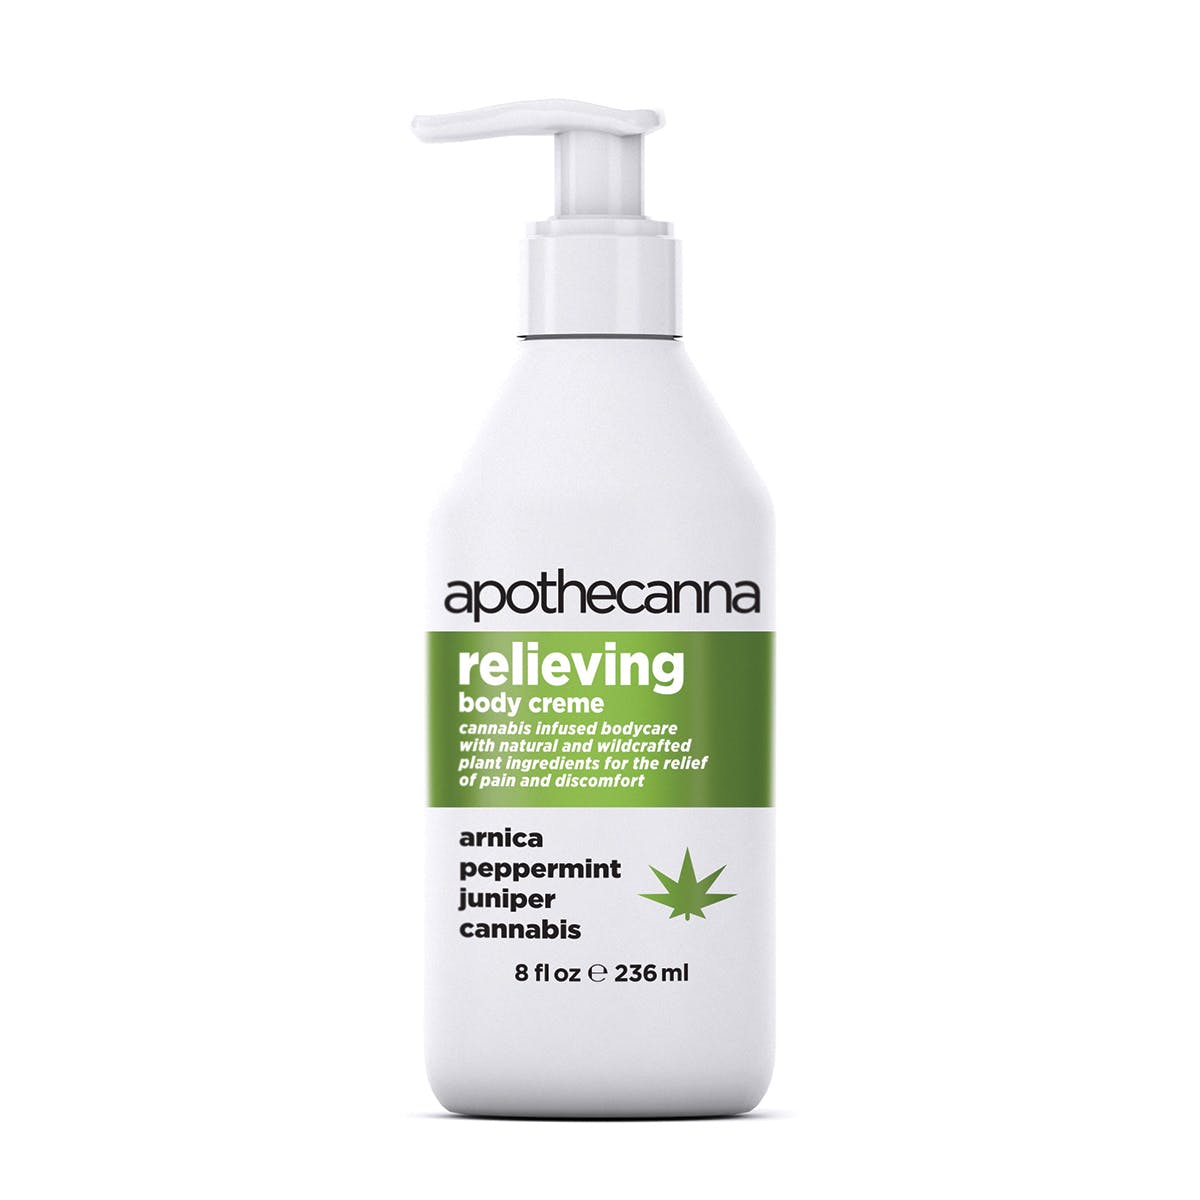 marijuana-dispensaries-the-medication-station-cottage-grove-in-cottage-grove-relieving-creme-2c-8-oz